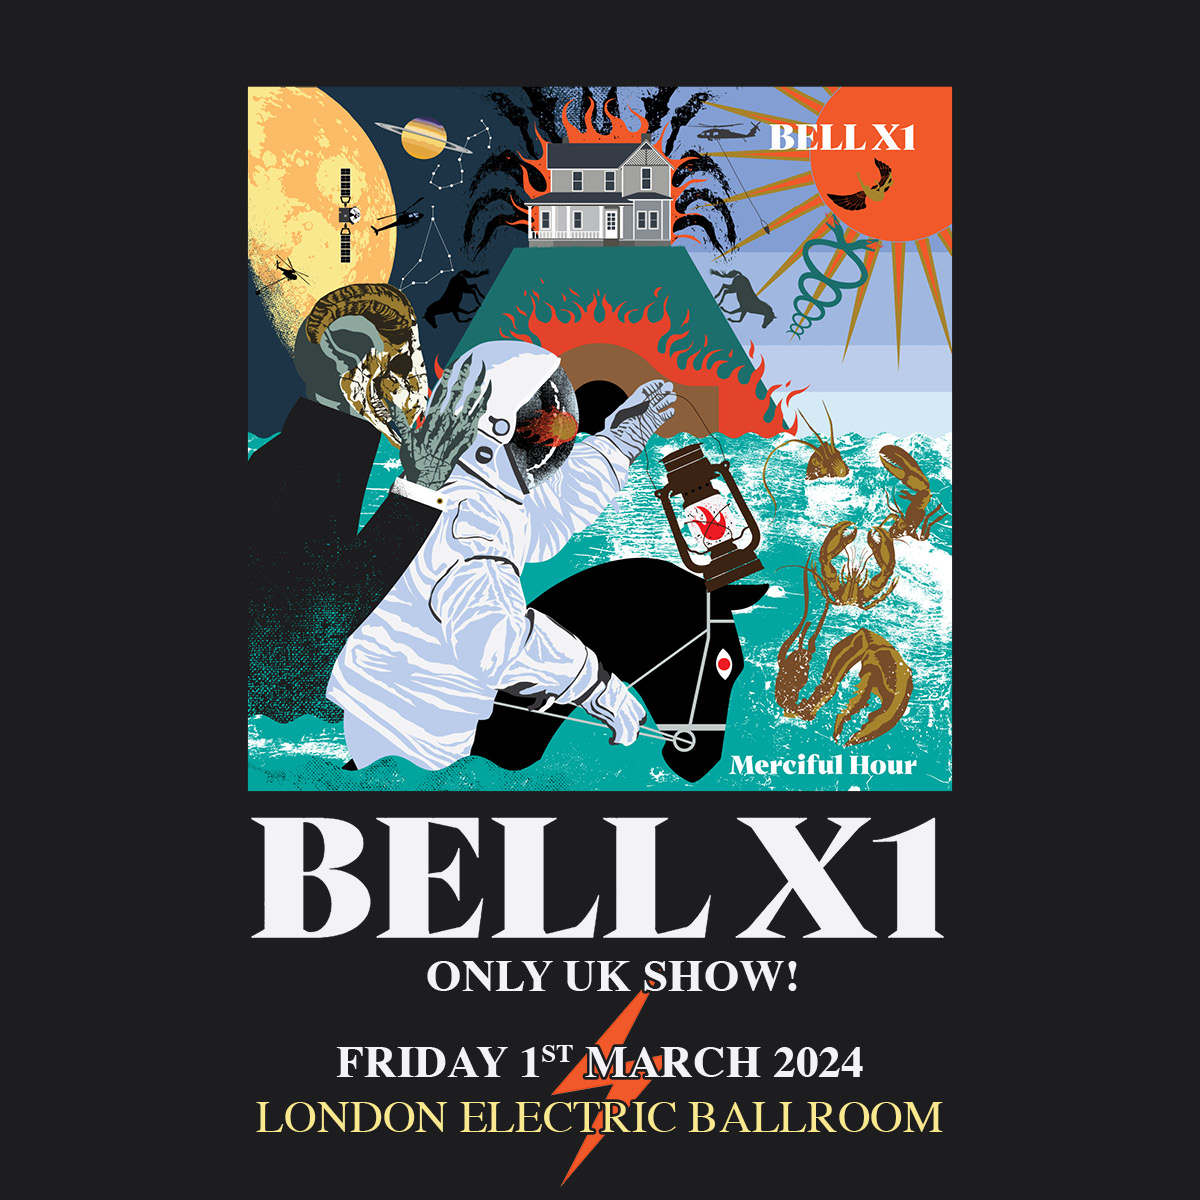 📣New Show Announcement📣 @BellX1 will be playing a show at London’s Electric Ballroom on the 1st of March 2024! Tickets will go on sale Fri, 24th of Nov at 10am!